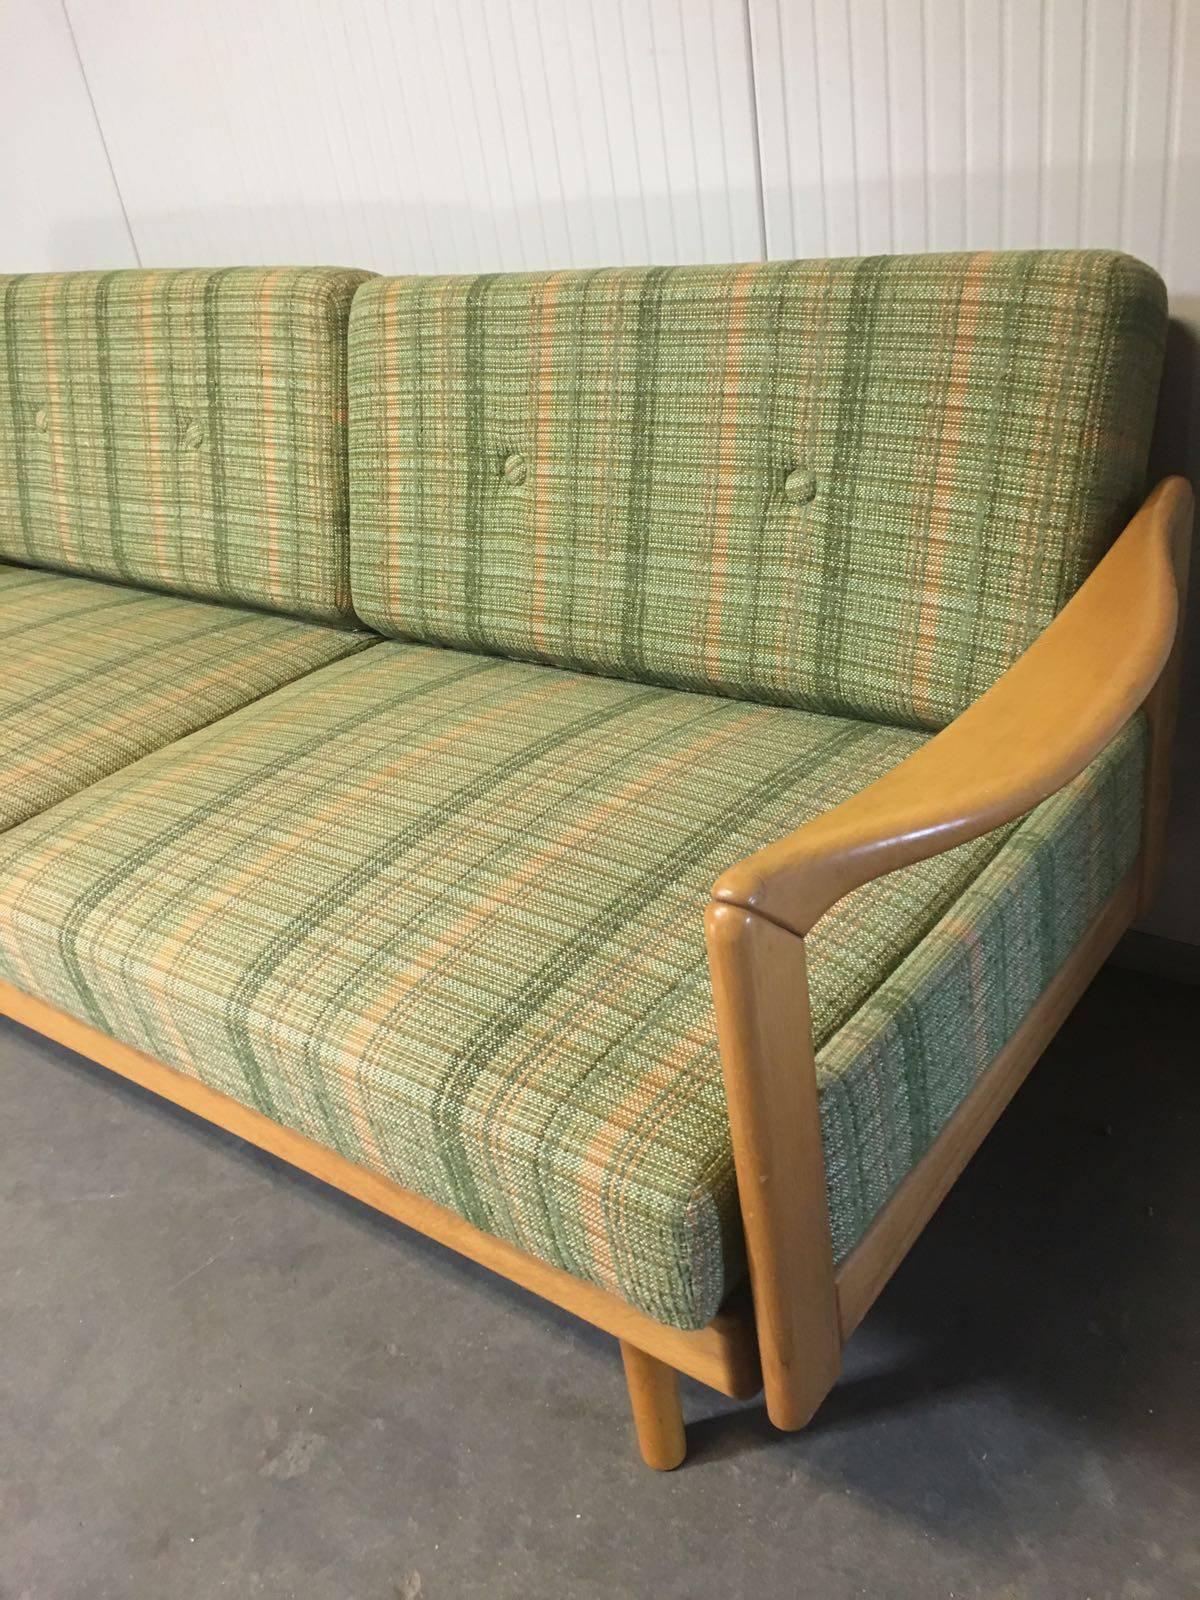 Knoll Sofa - Daybed in Original Upholstery In Good Condition For Sale In Brussels, BE